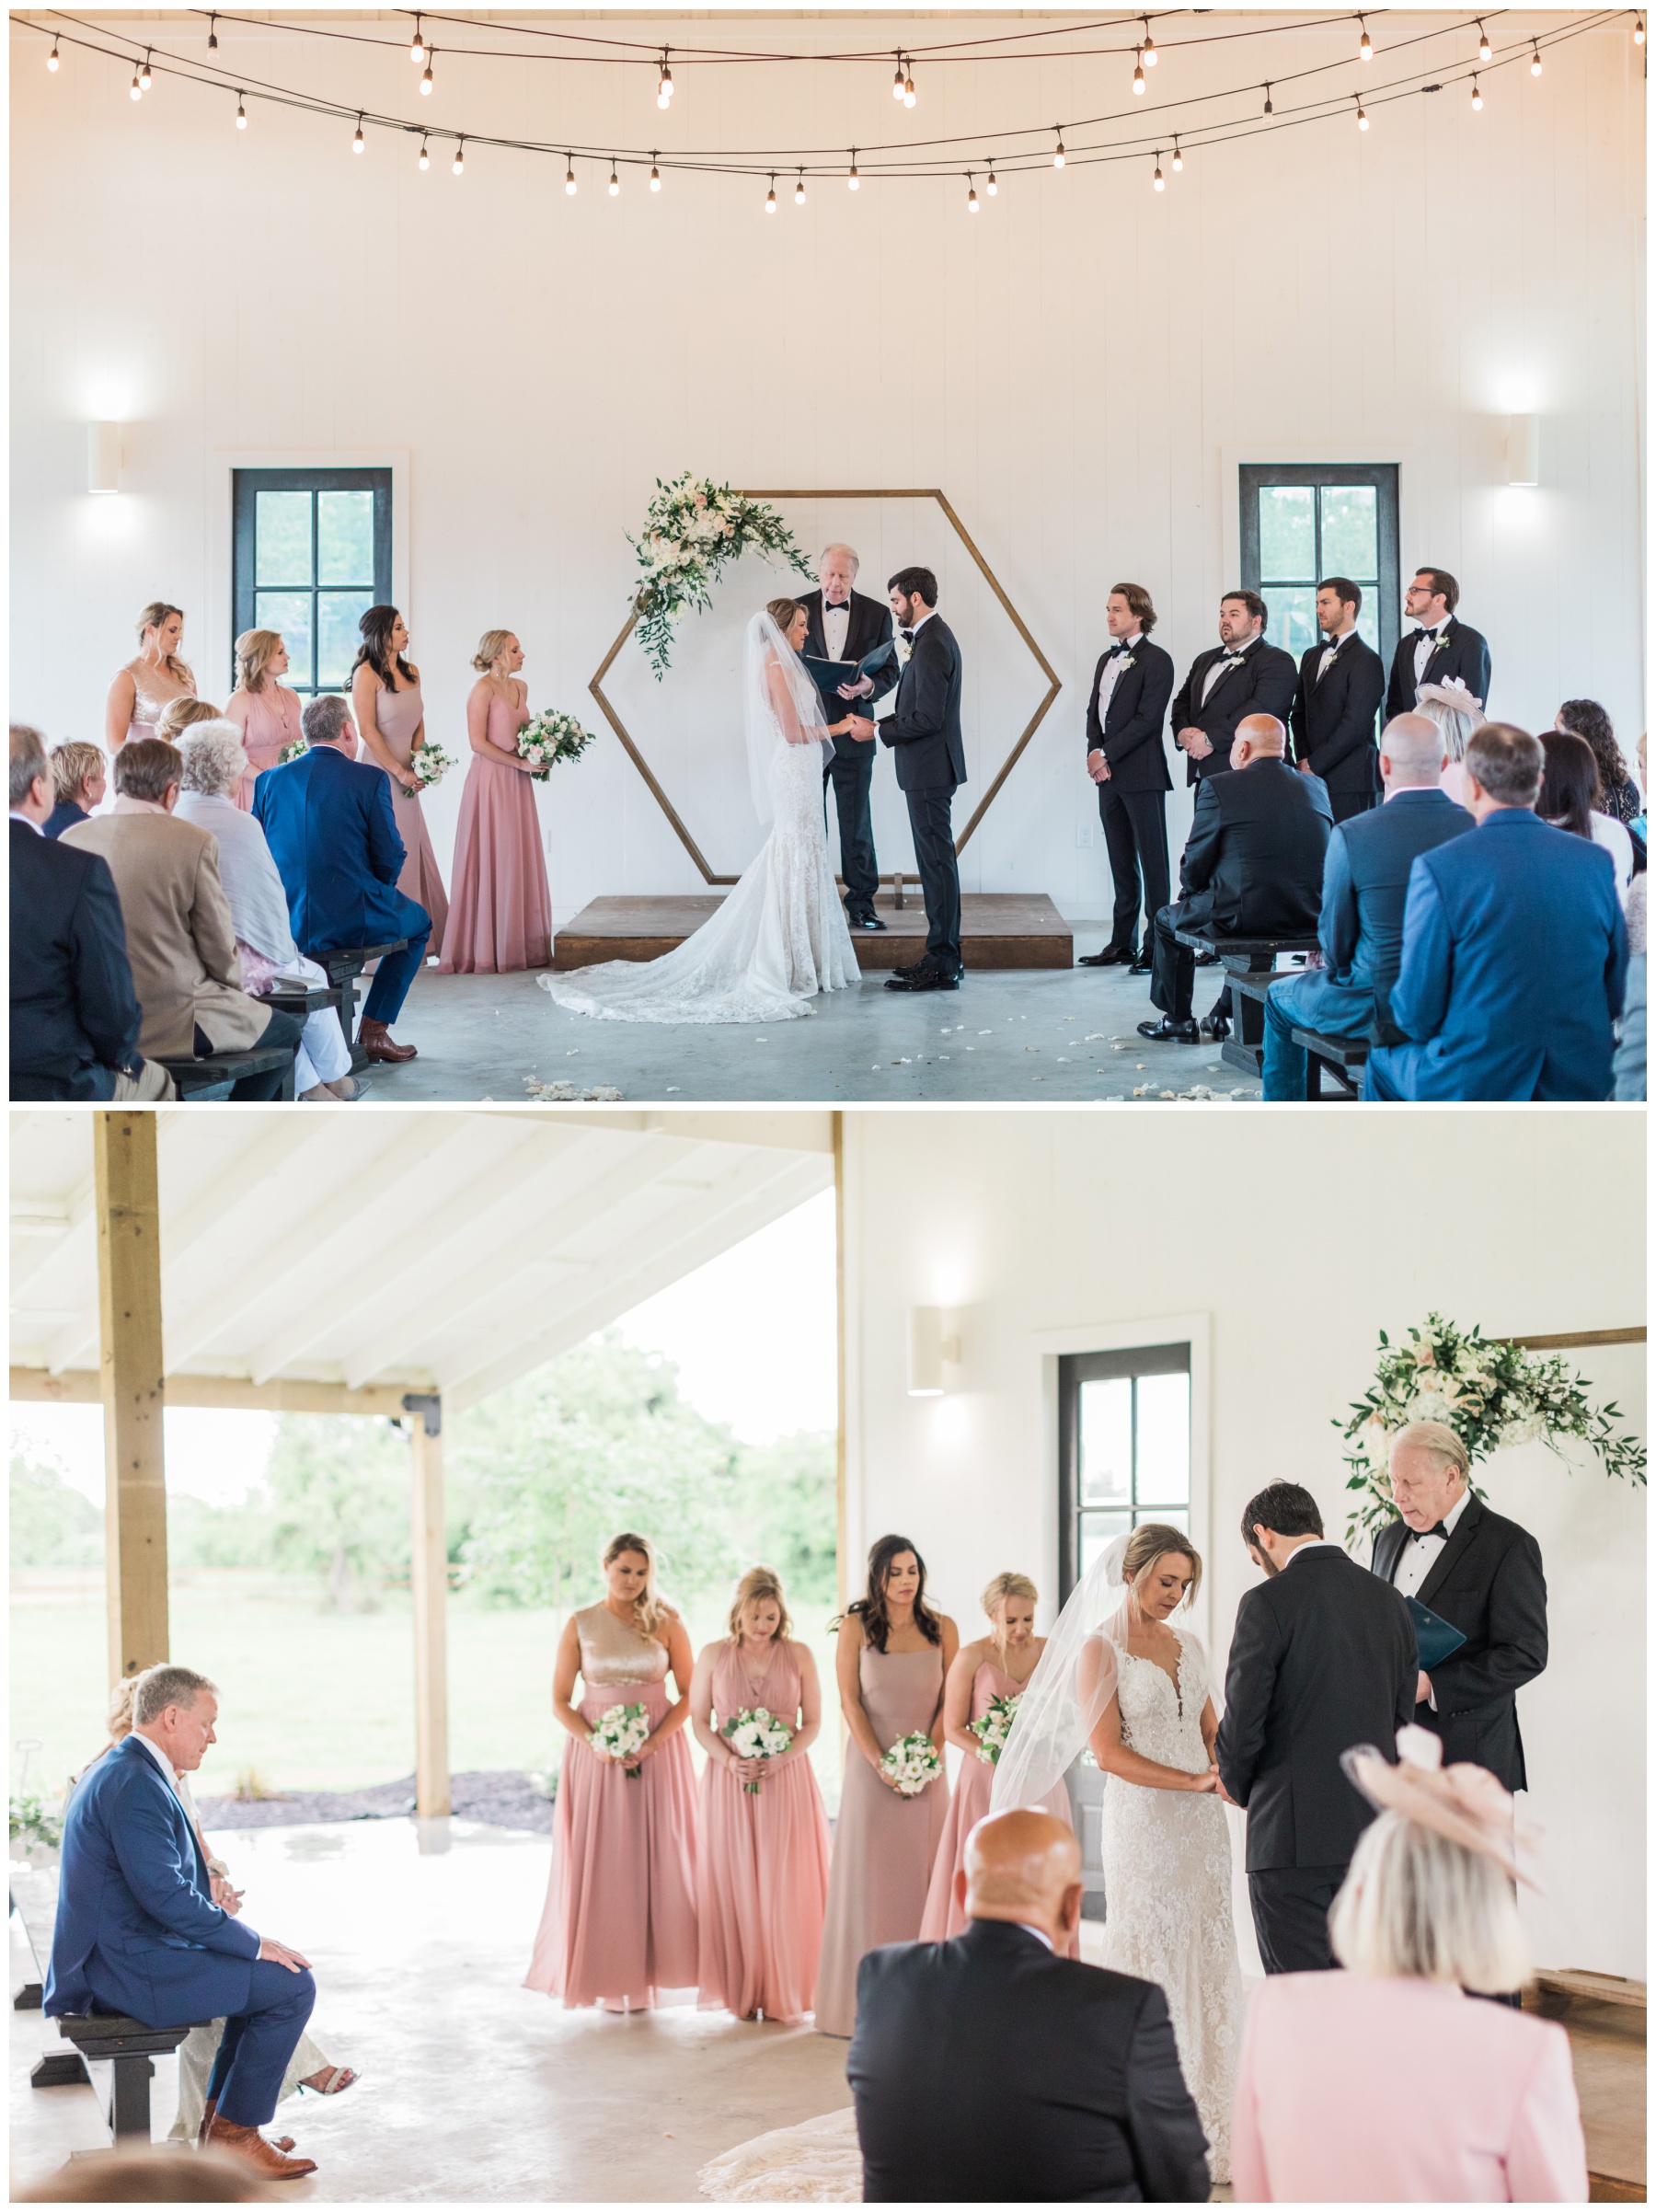 Indoor wedding ceremony at The Barn At Willowynn